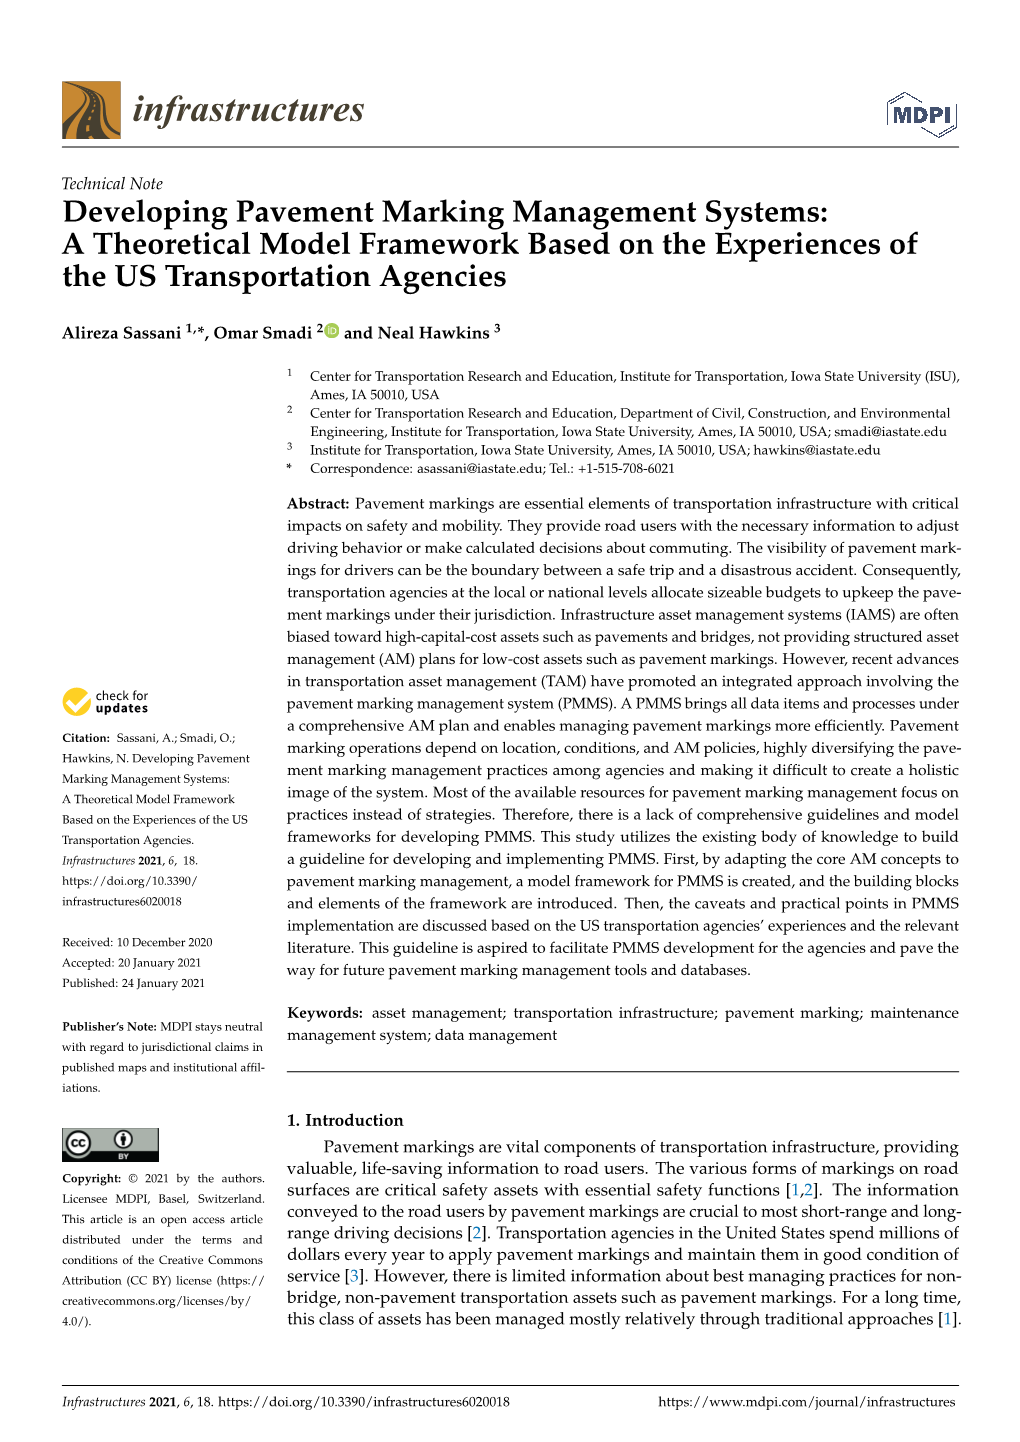 Developing Pavement Marking Management Systems: a Theoretical Model Framework Based on the Experiences of the US Transportation Agencies